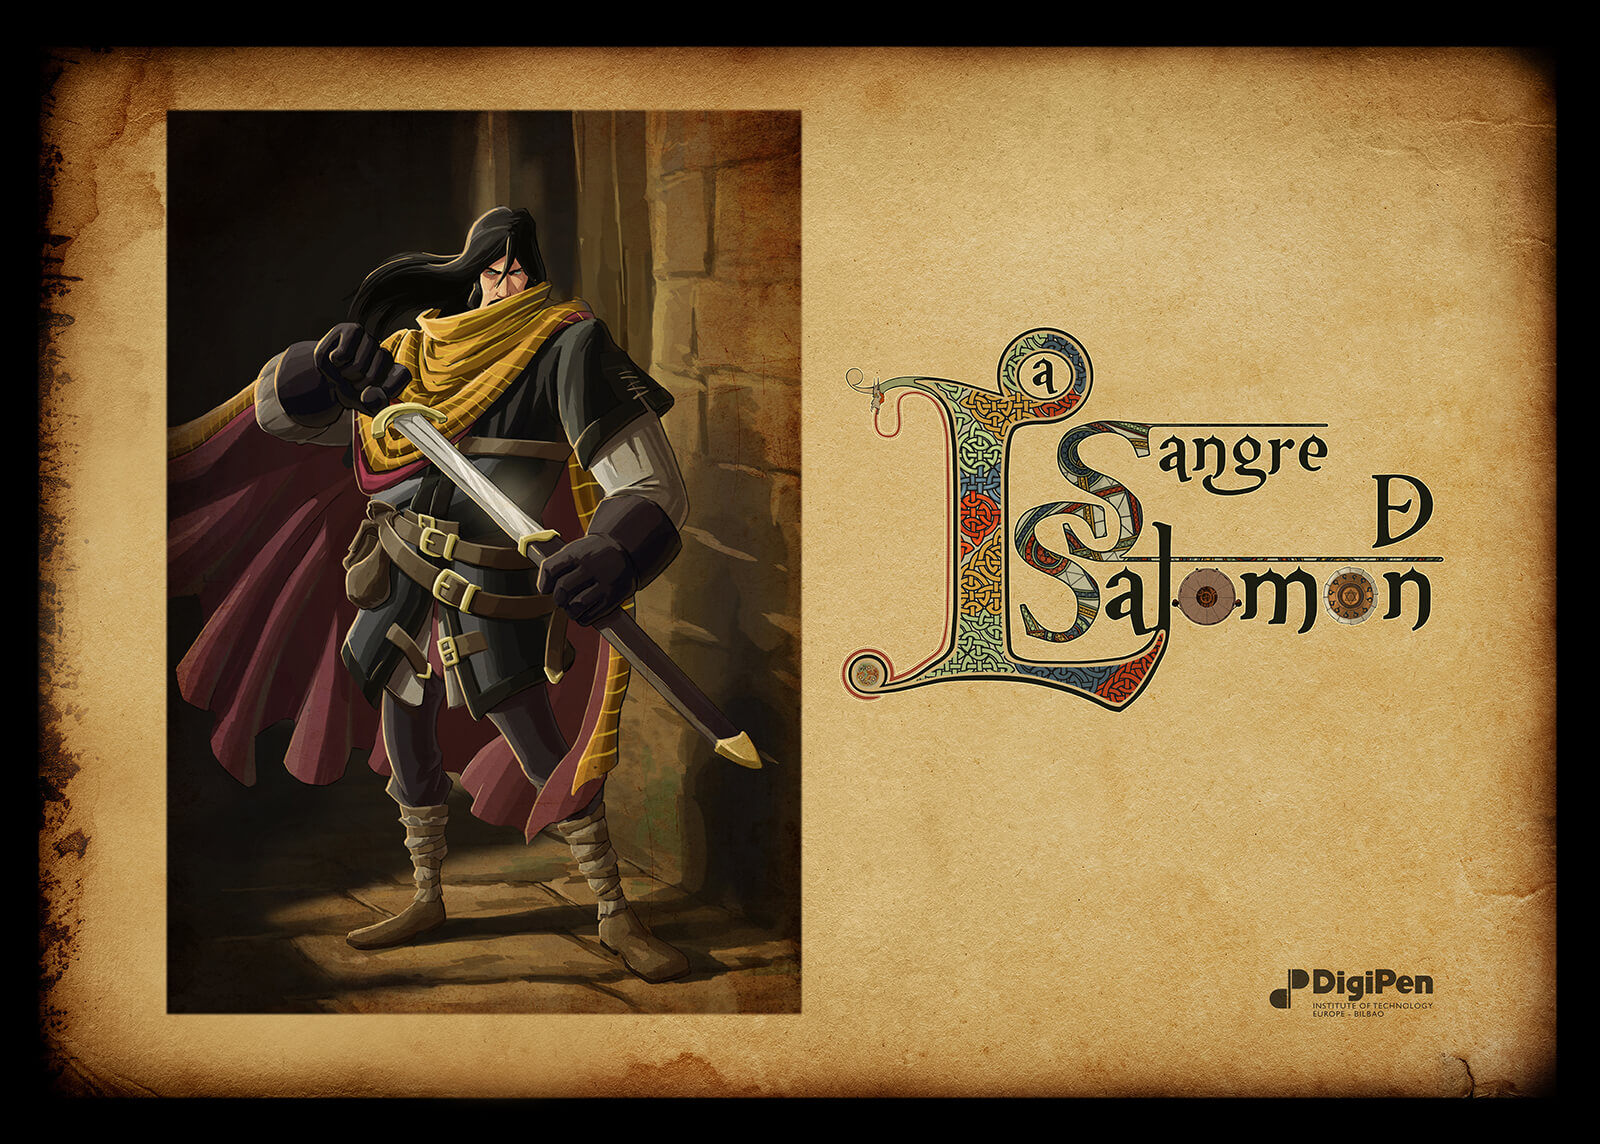 Presentation slide for the Sangre de Salomon, depicting a man with long-black hair, medieval armor, and a red cape and sword